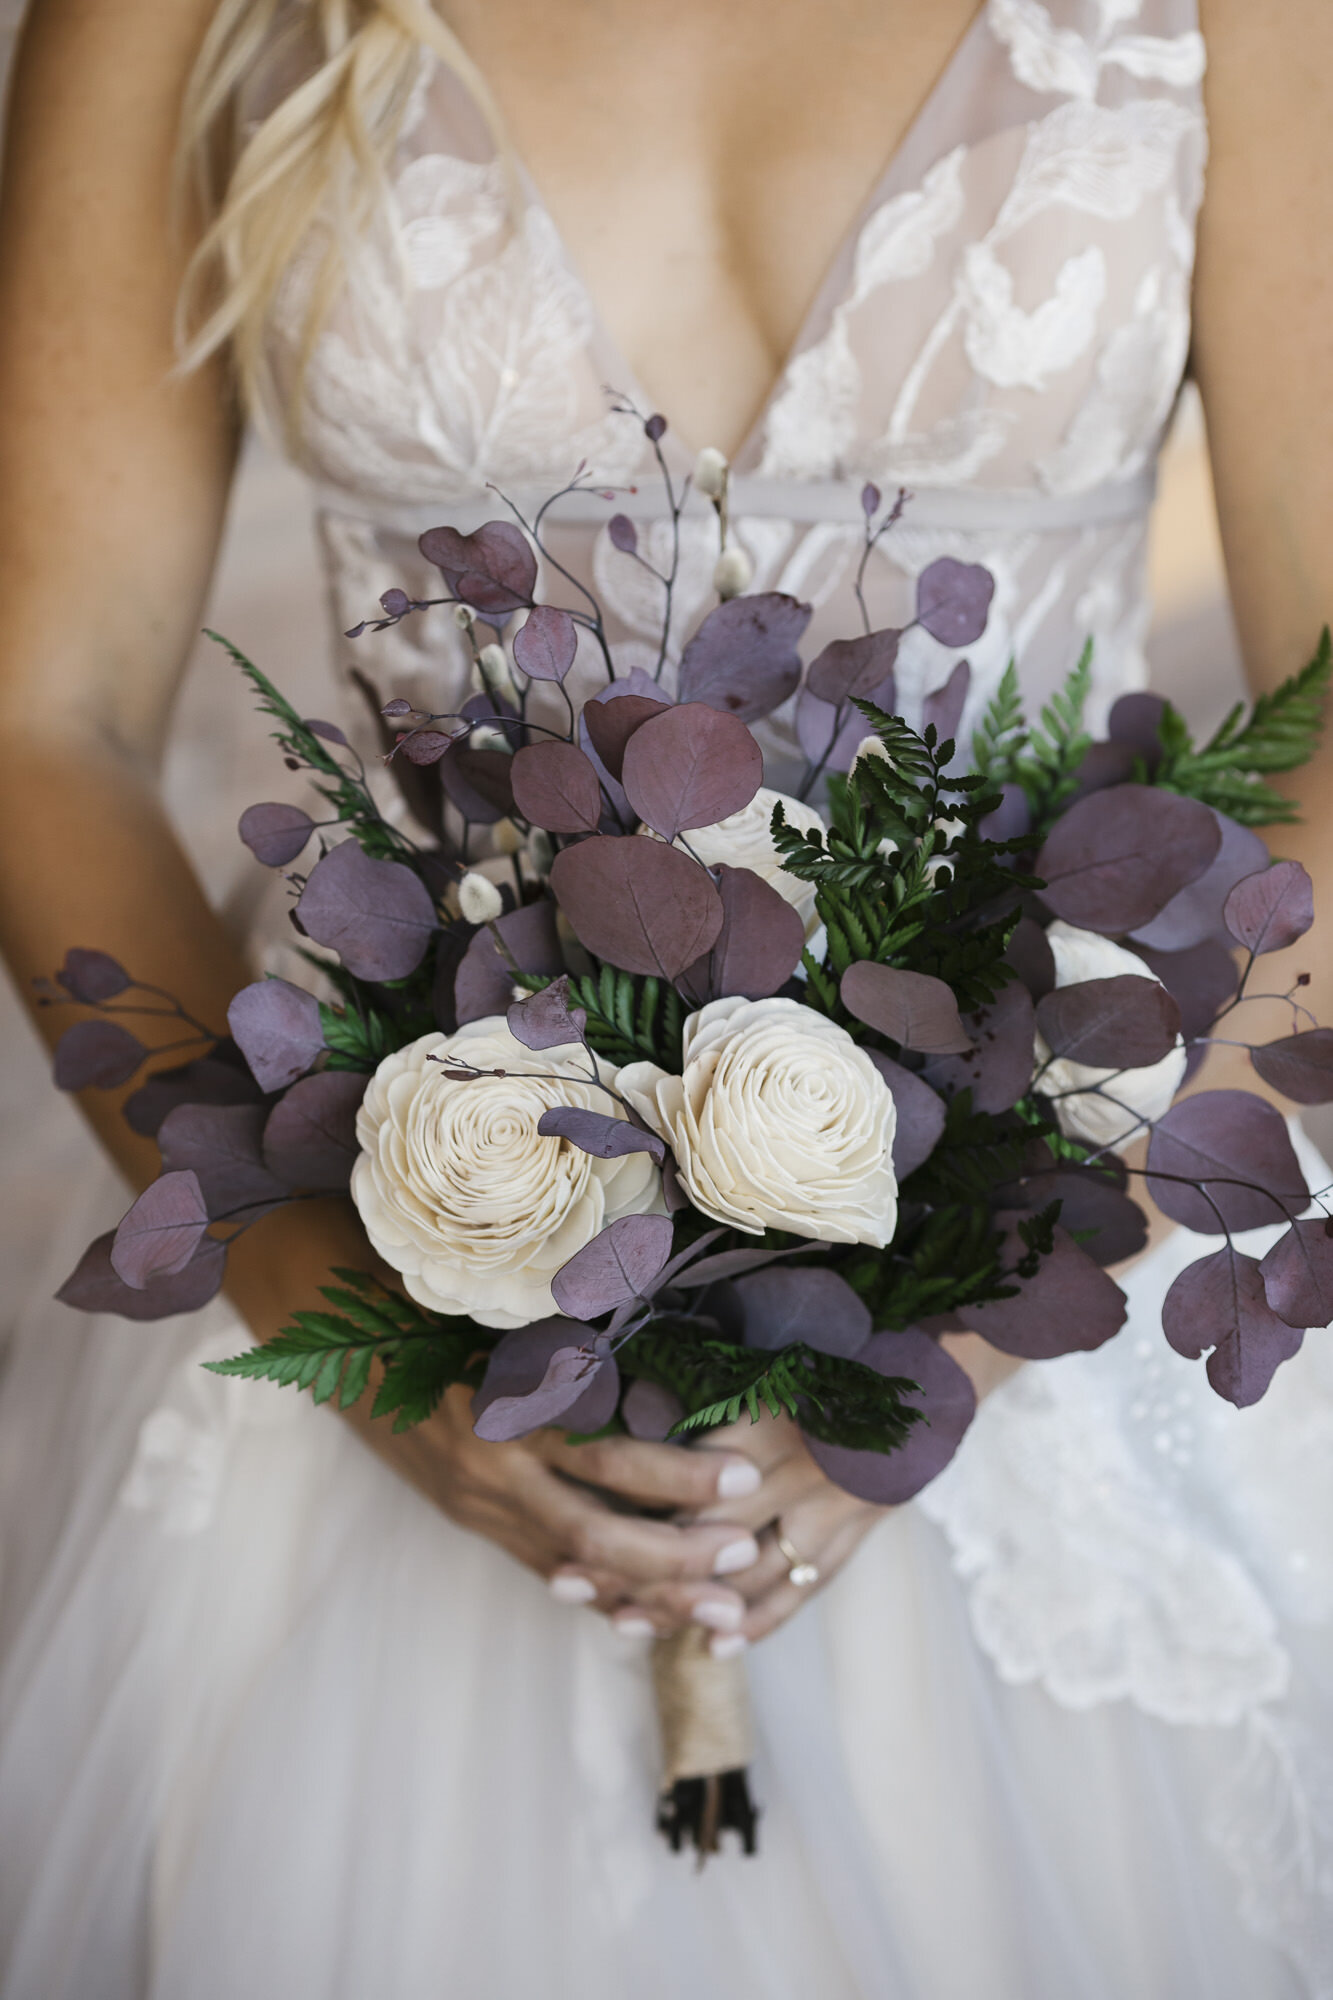 Detail shot of the bride's artificial flower bouquet handmade by her mother